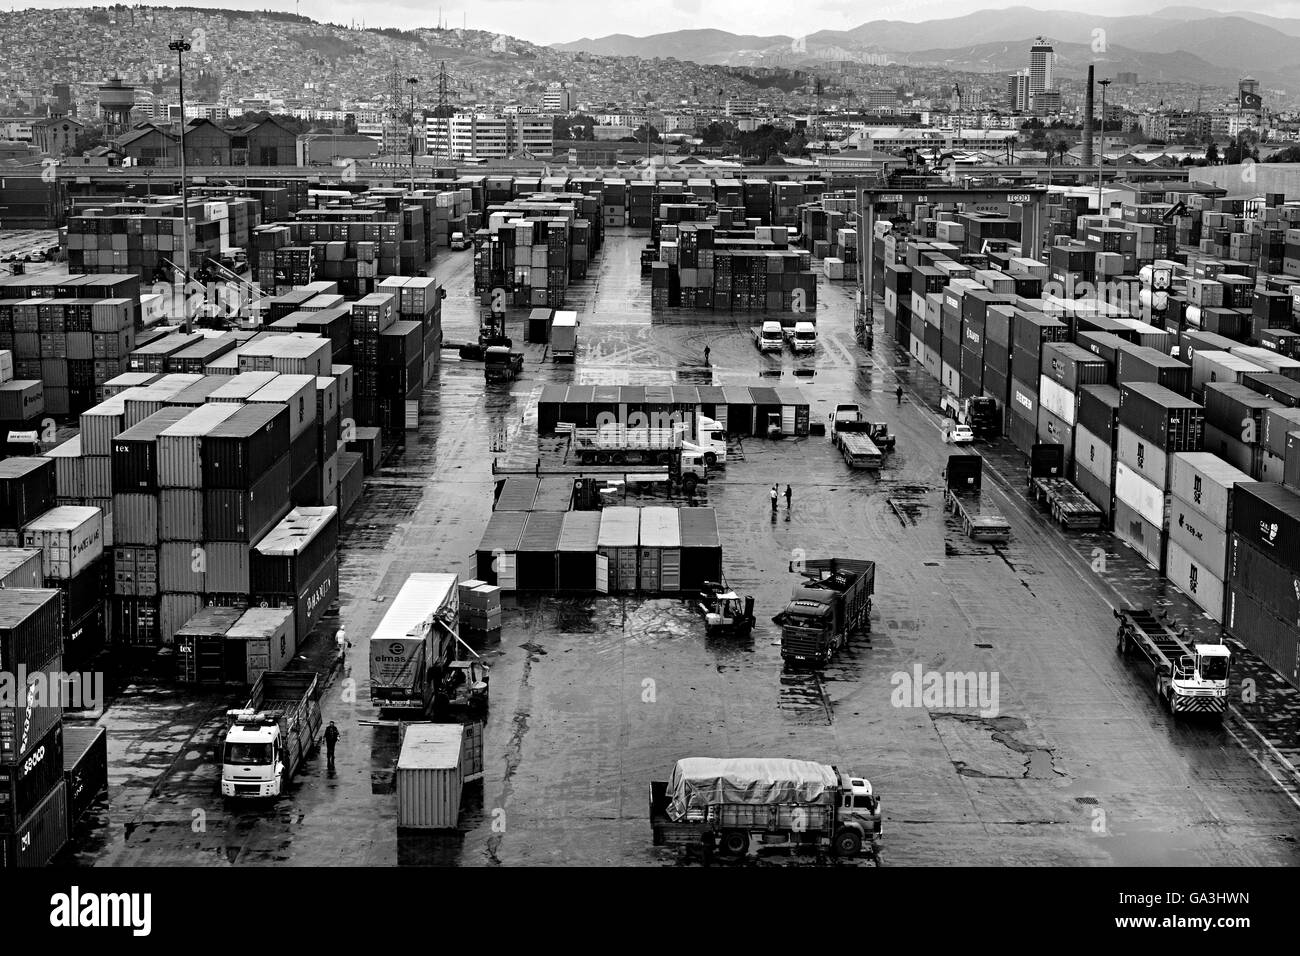 Containers and slience on the port of Izmir Stock Photo